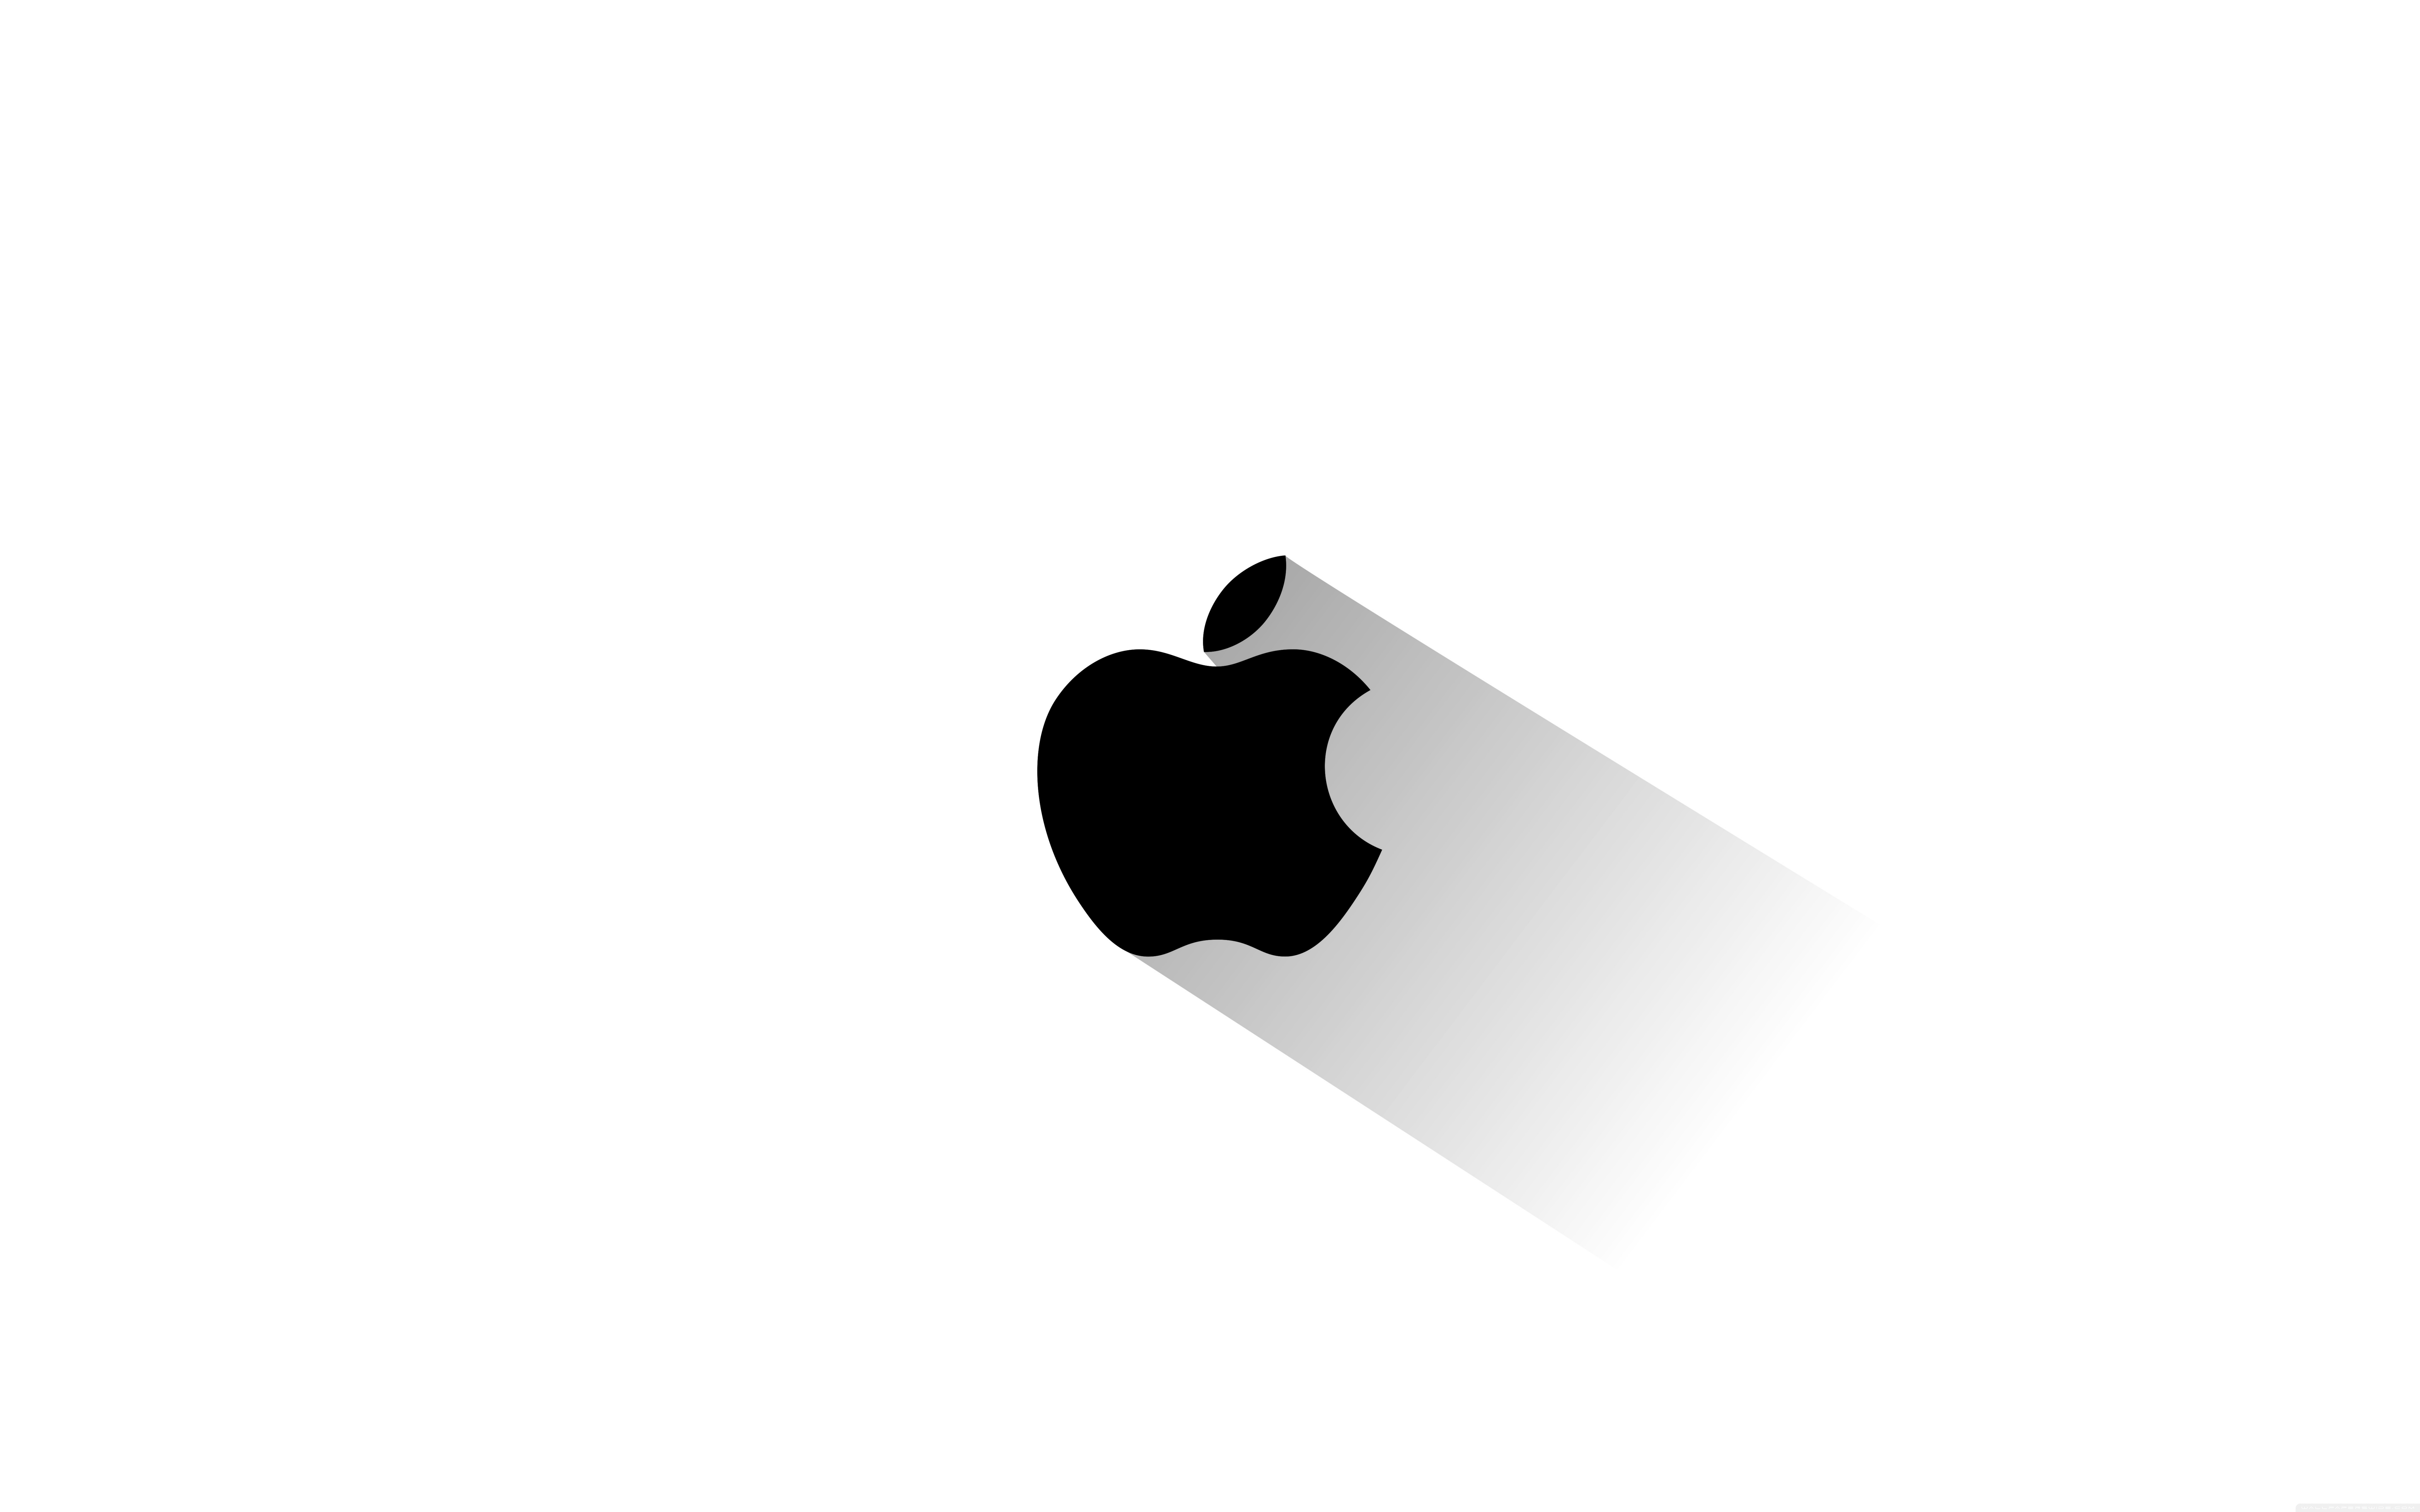 White Apple Logo On Left Hands In Black Background Picture Hd Wallpaper  Technology Logo Picture Apple Logo Wallpaper For Iphone Cca Ca Caf Raw   फट शयर